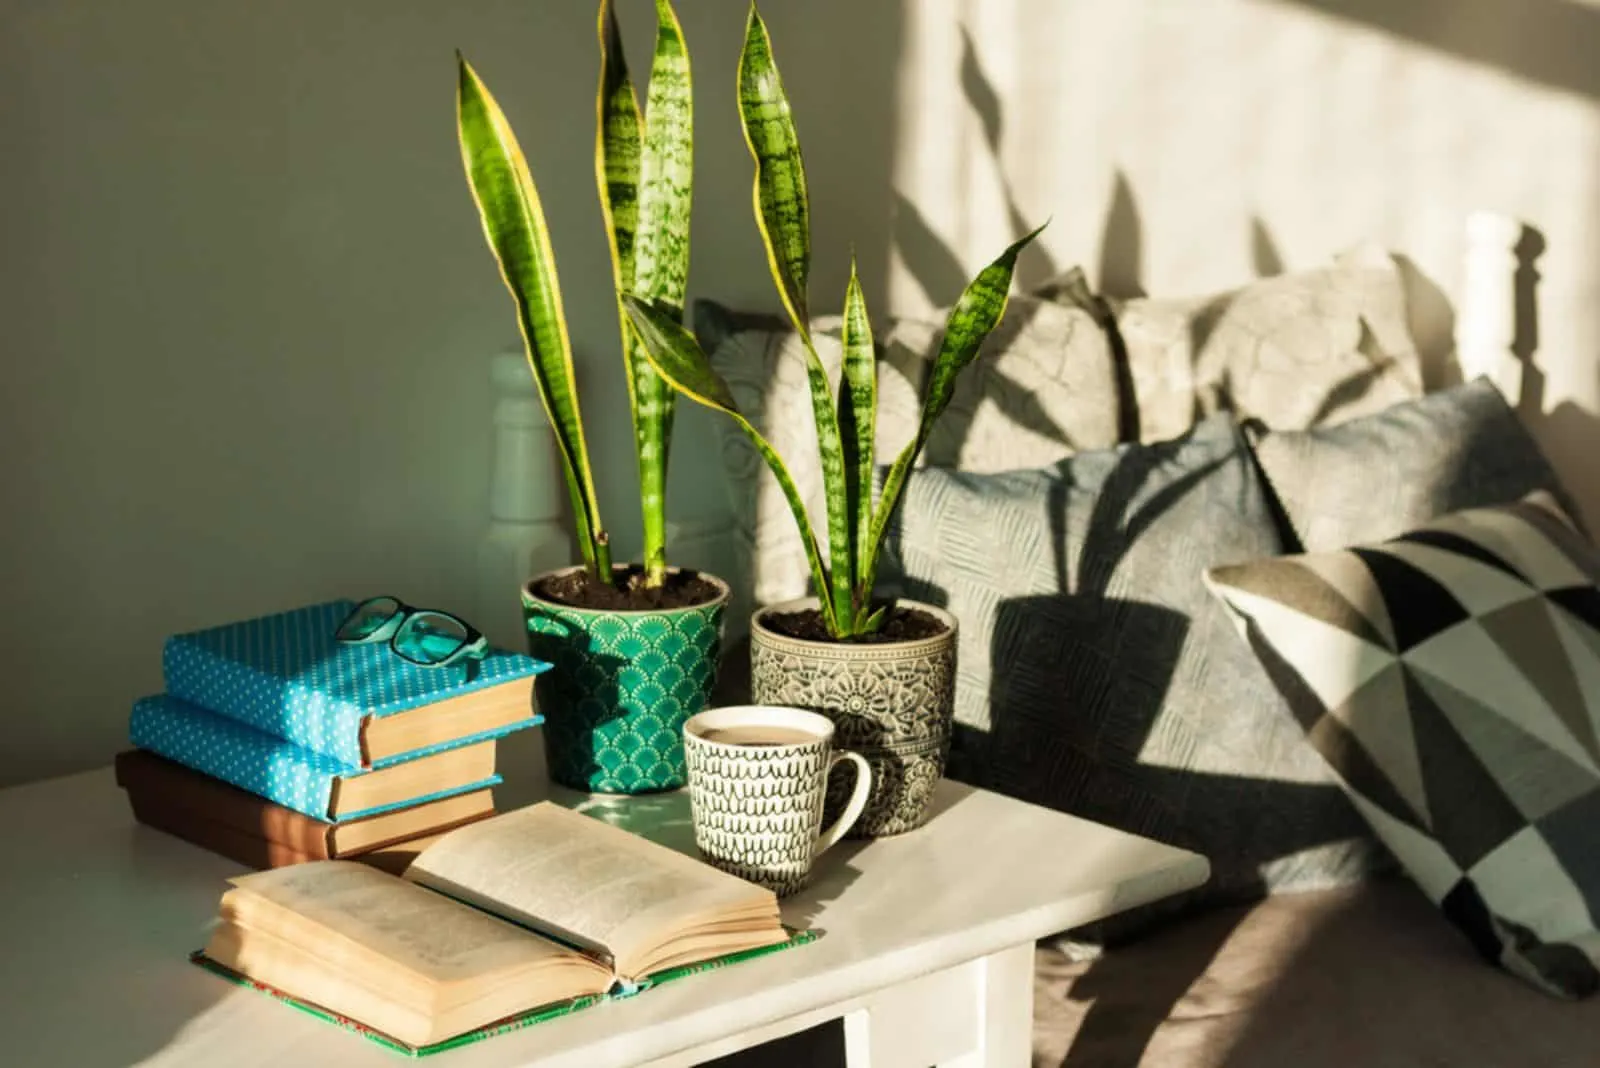 Sansevieria plants in pots with books and coffee on table